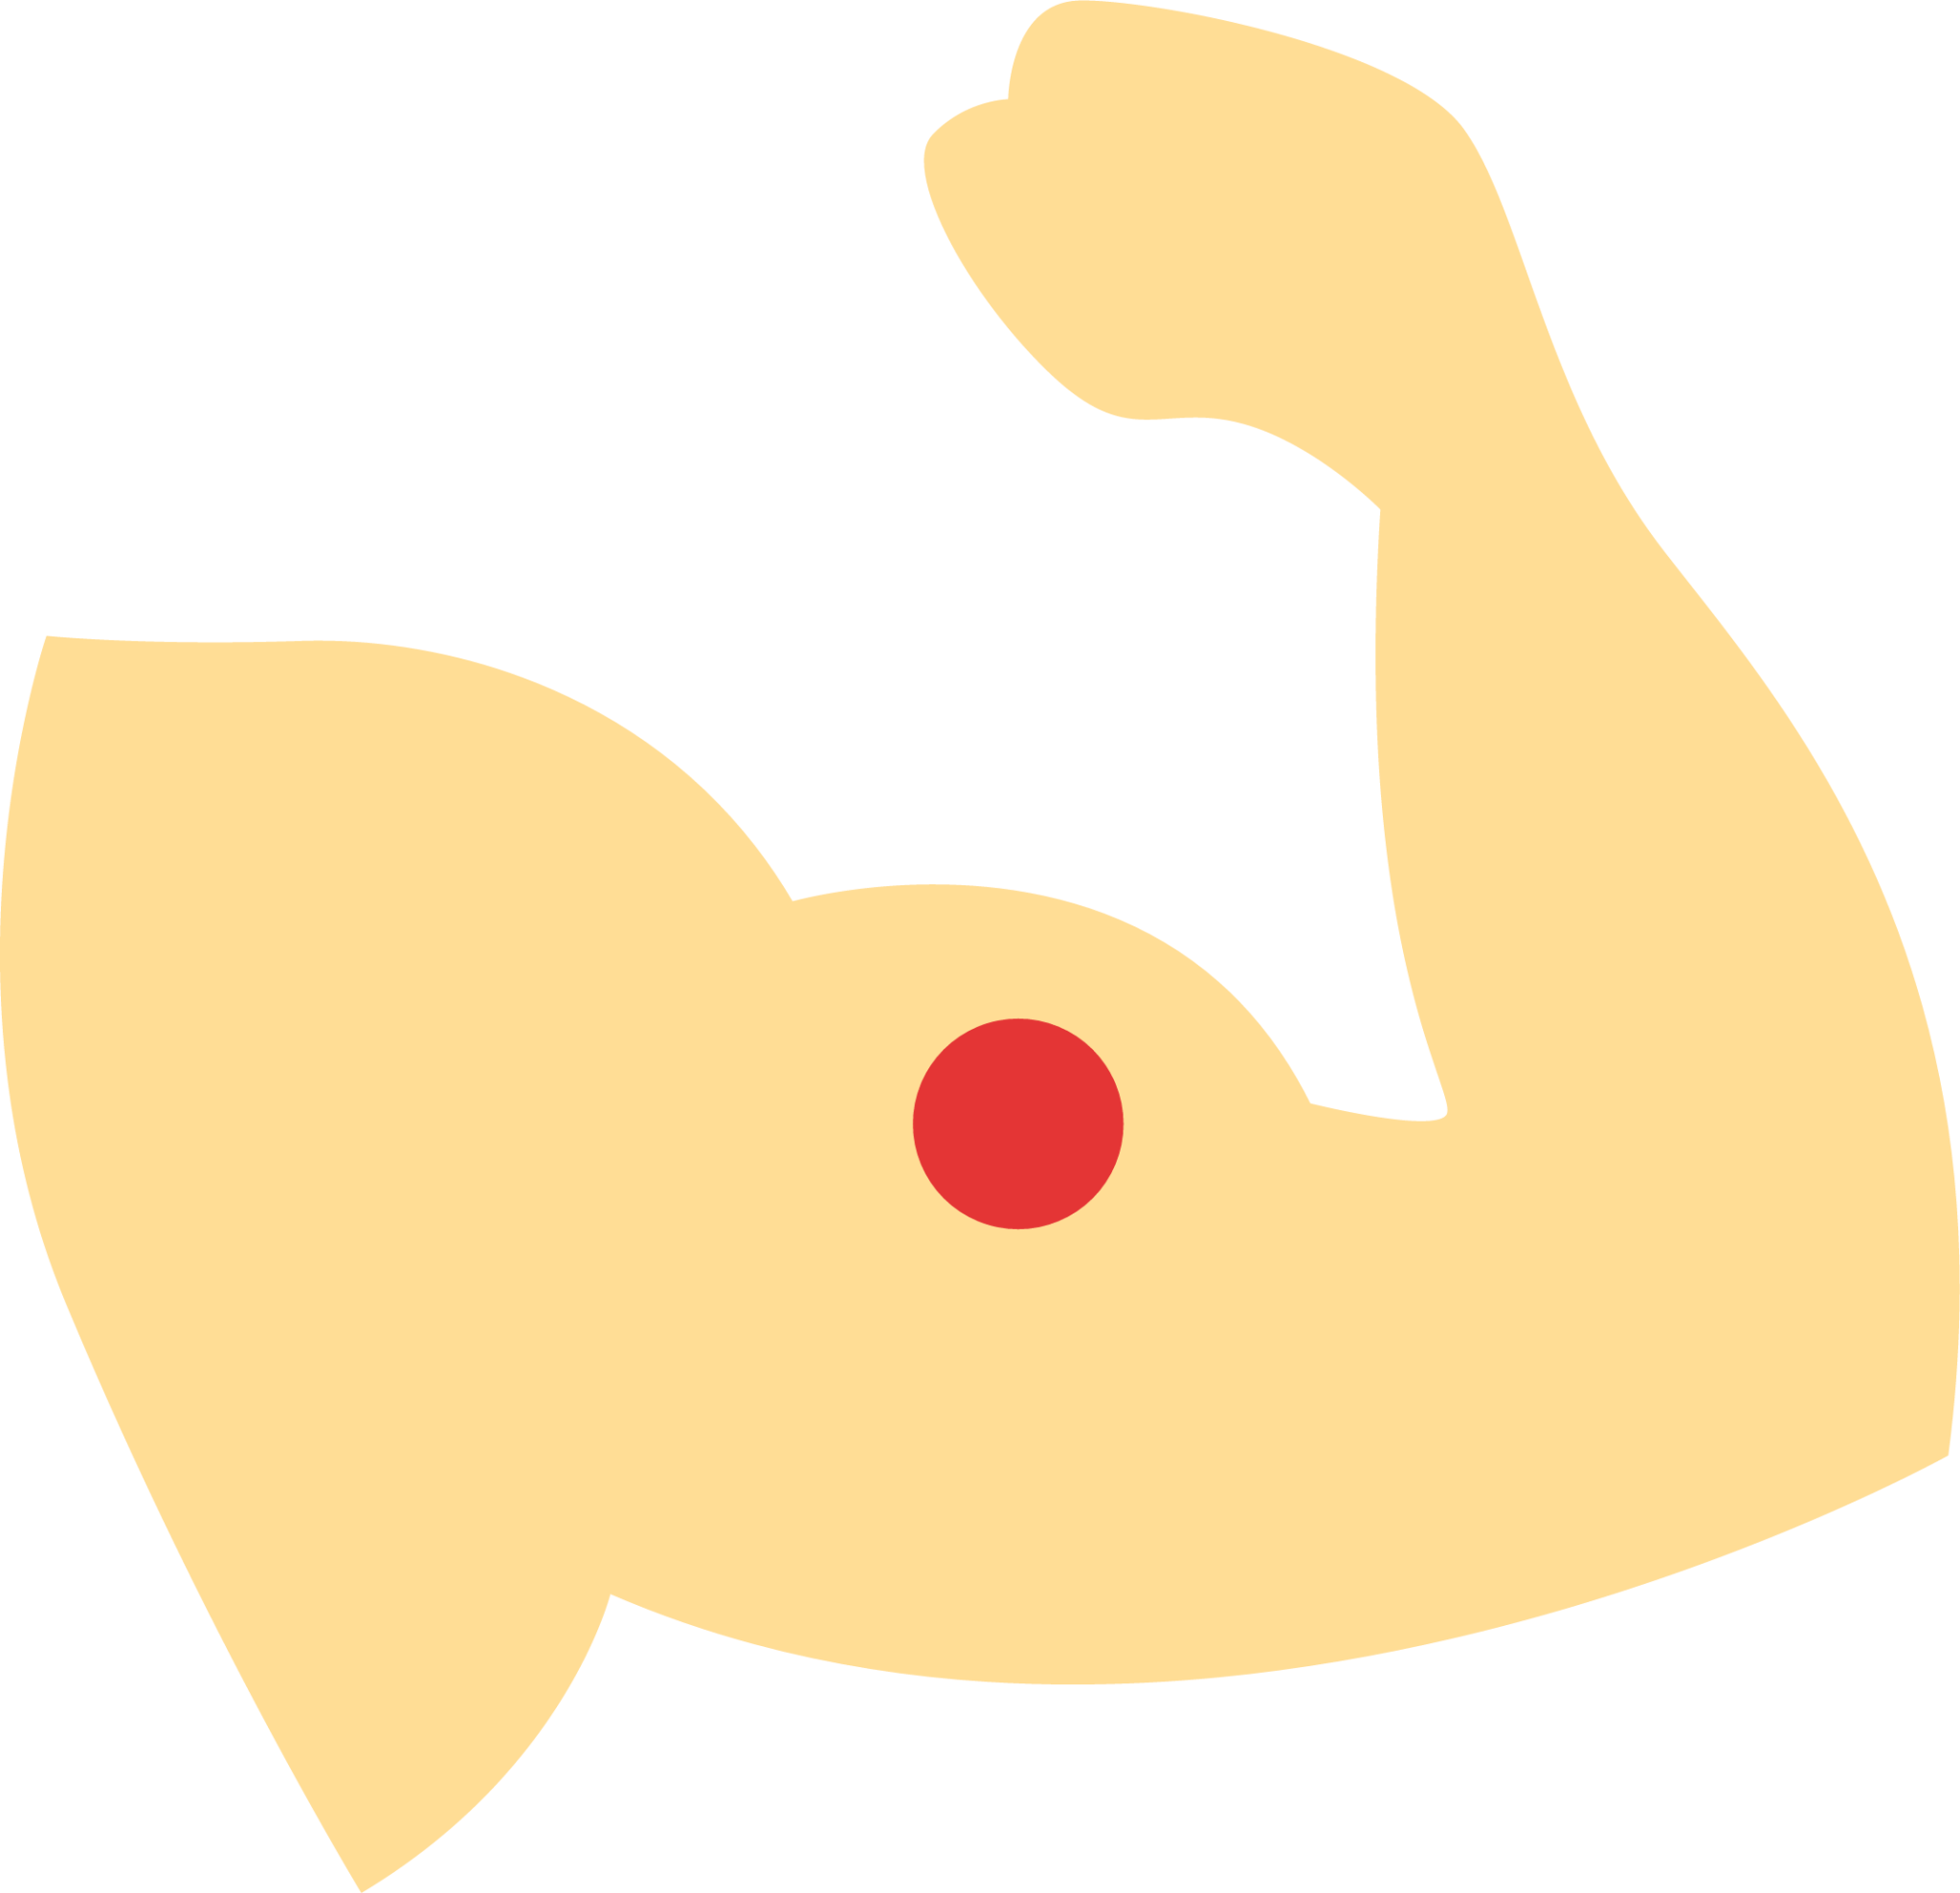 biceps musc icon